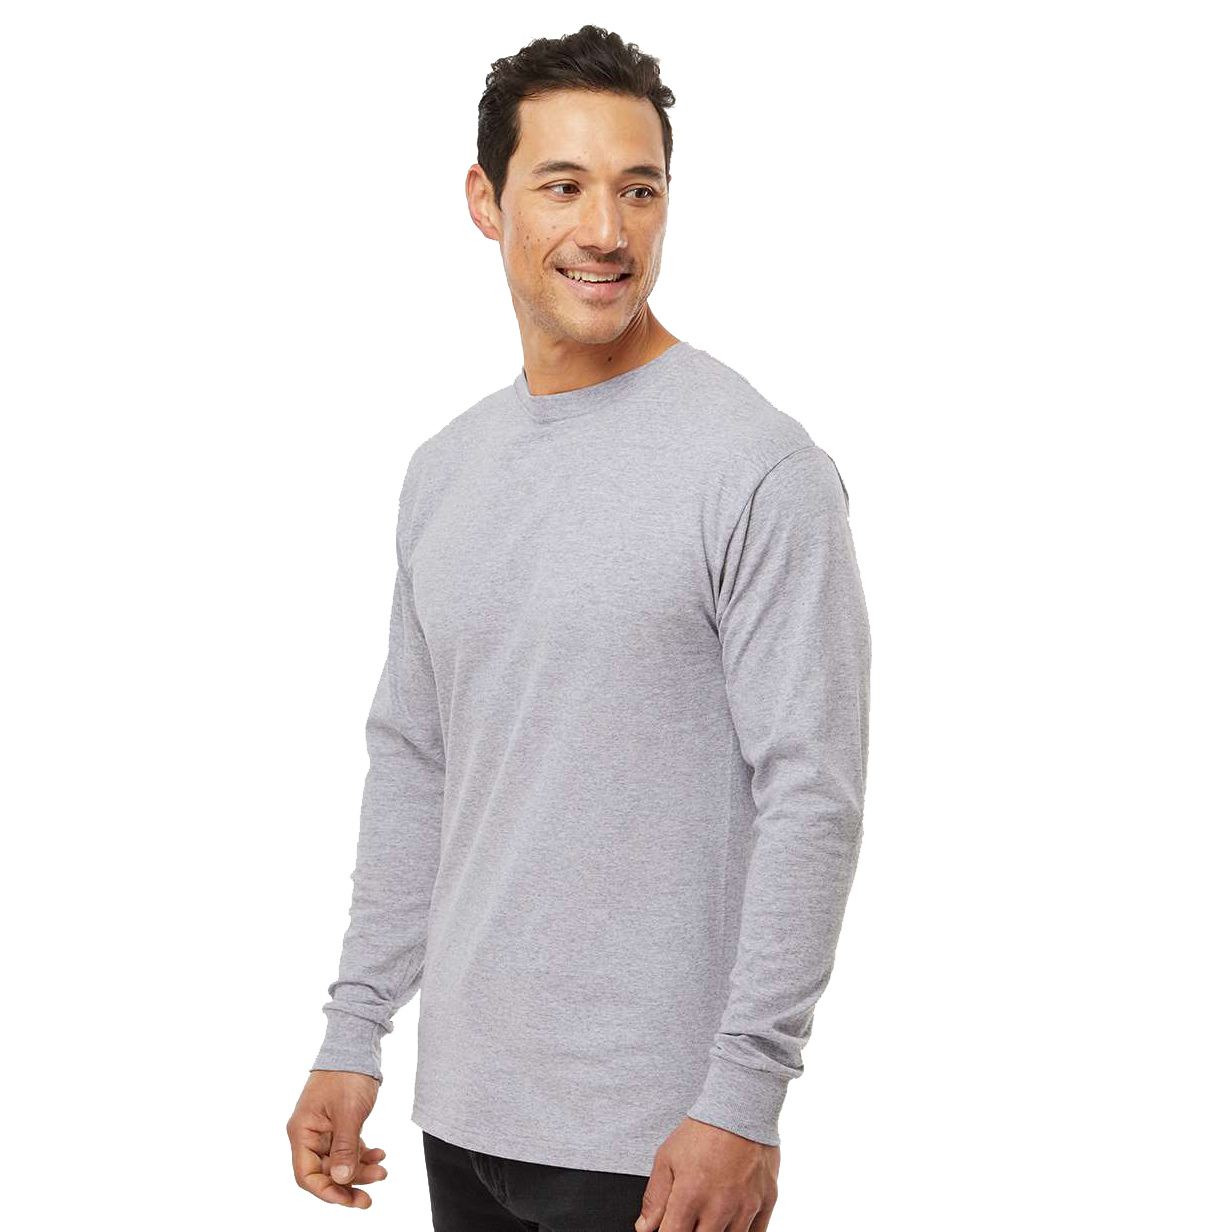 M&O 4820 Gold Soft Touch Long Sleeve T-shirt